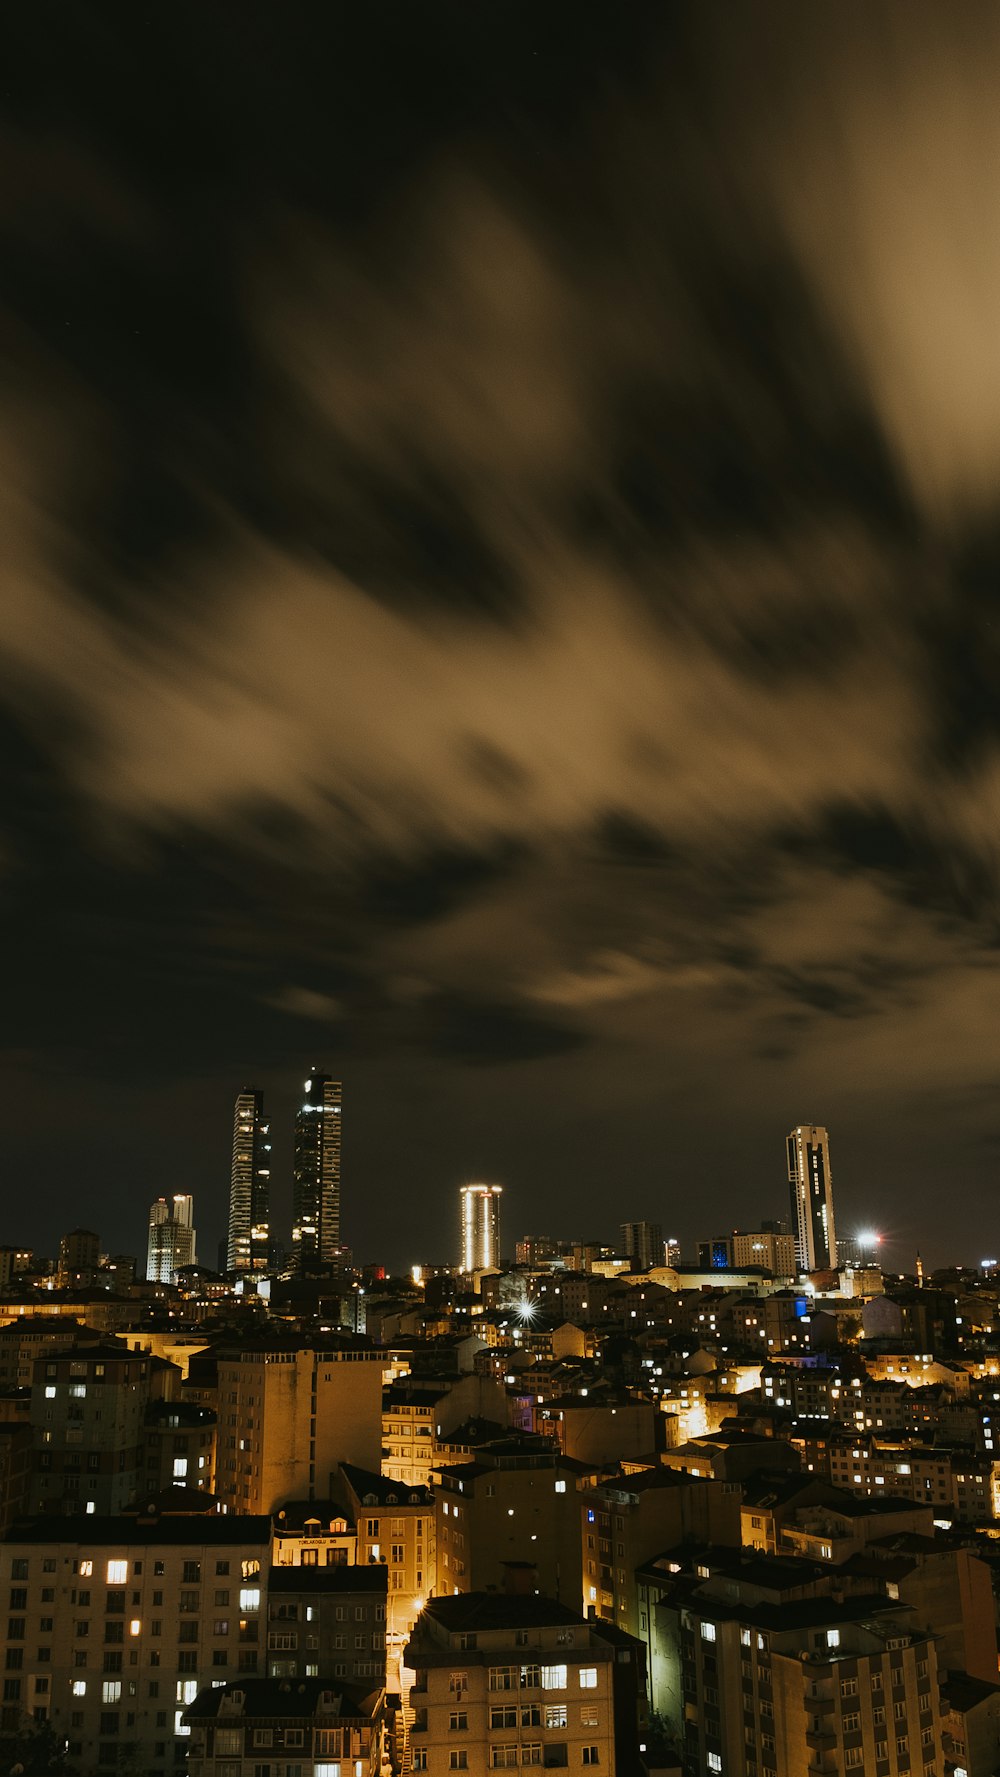 city skyline under gray clouds during night time